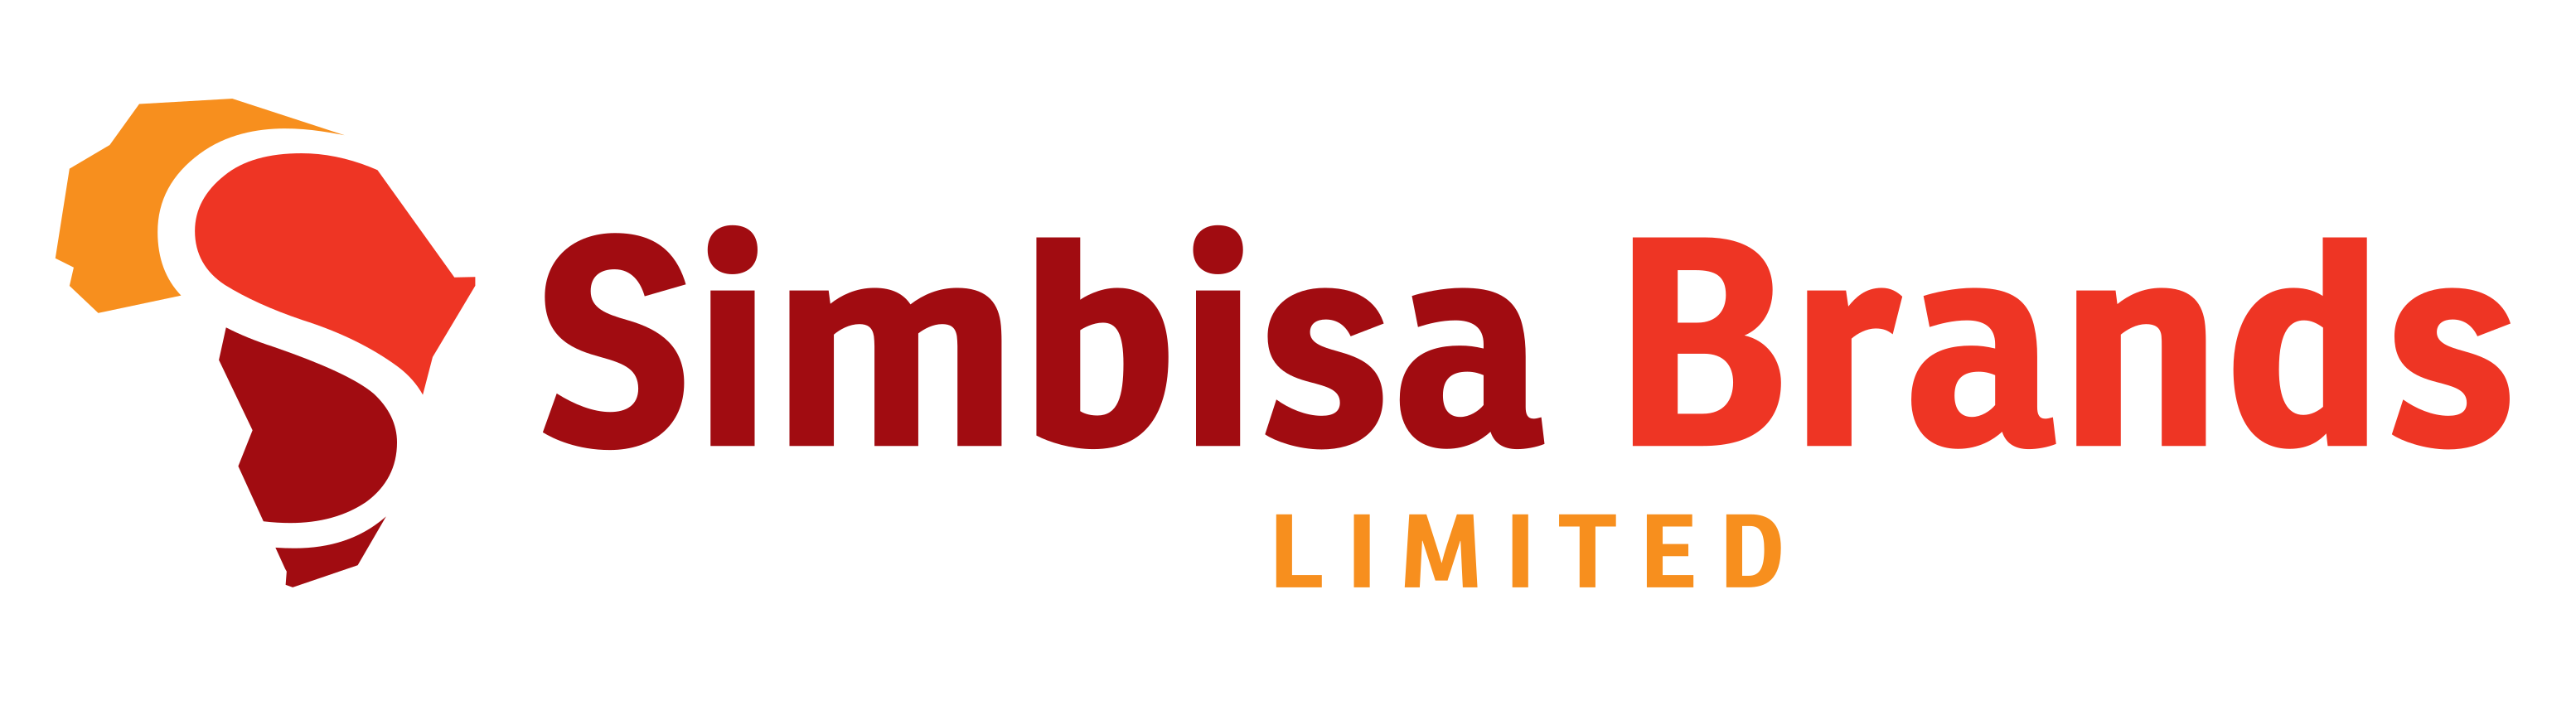  Simbisa Brands shifts focus to growing regional operations